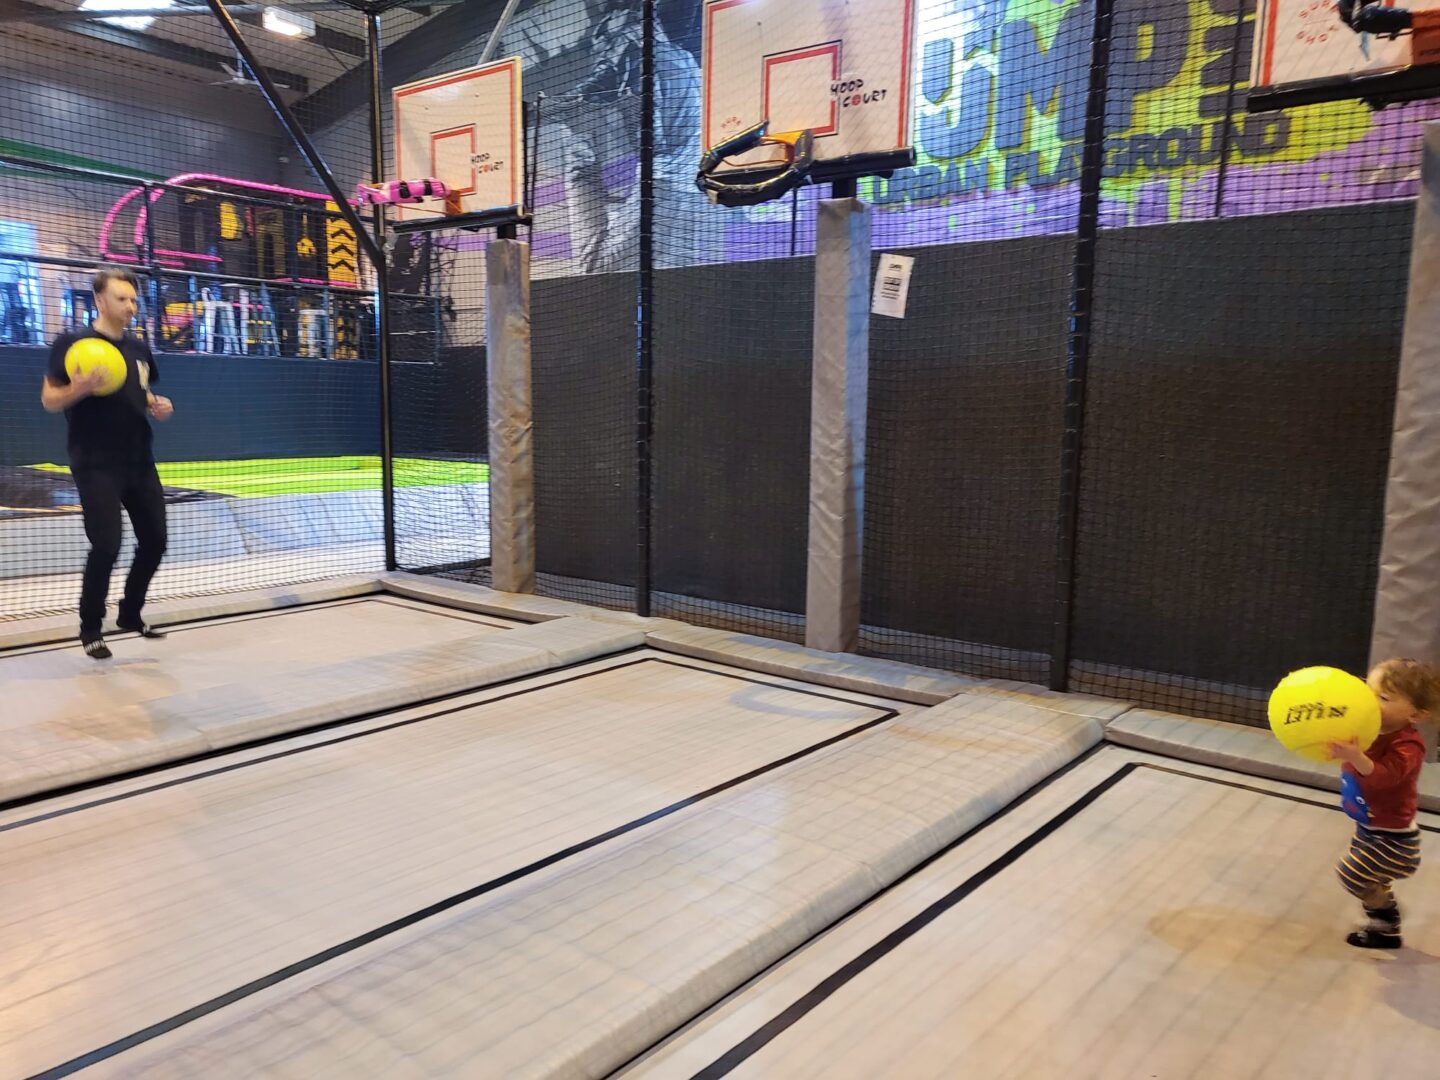 Burning energy by trampolining with a toddler at Jump Inc Bicester - basketball court